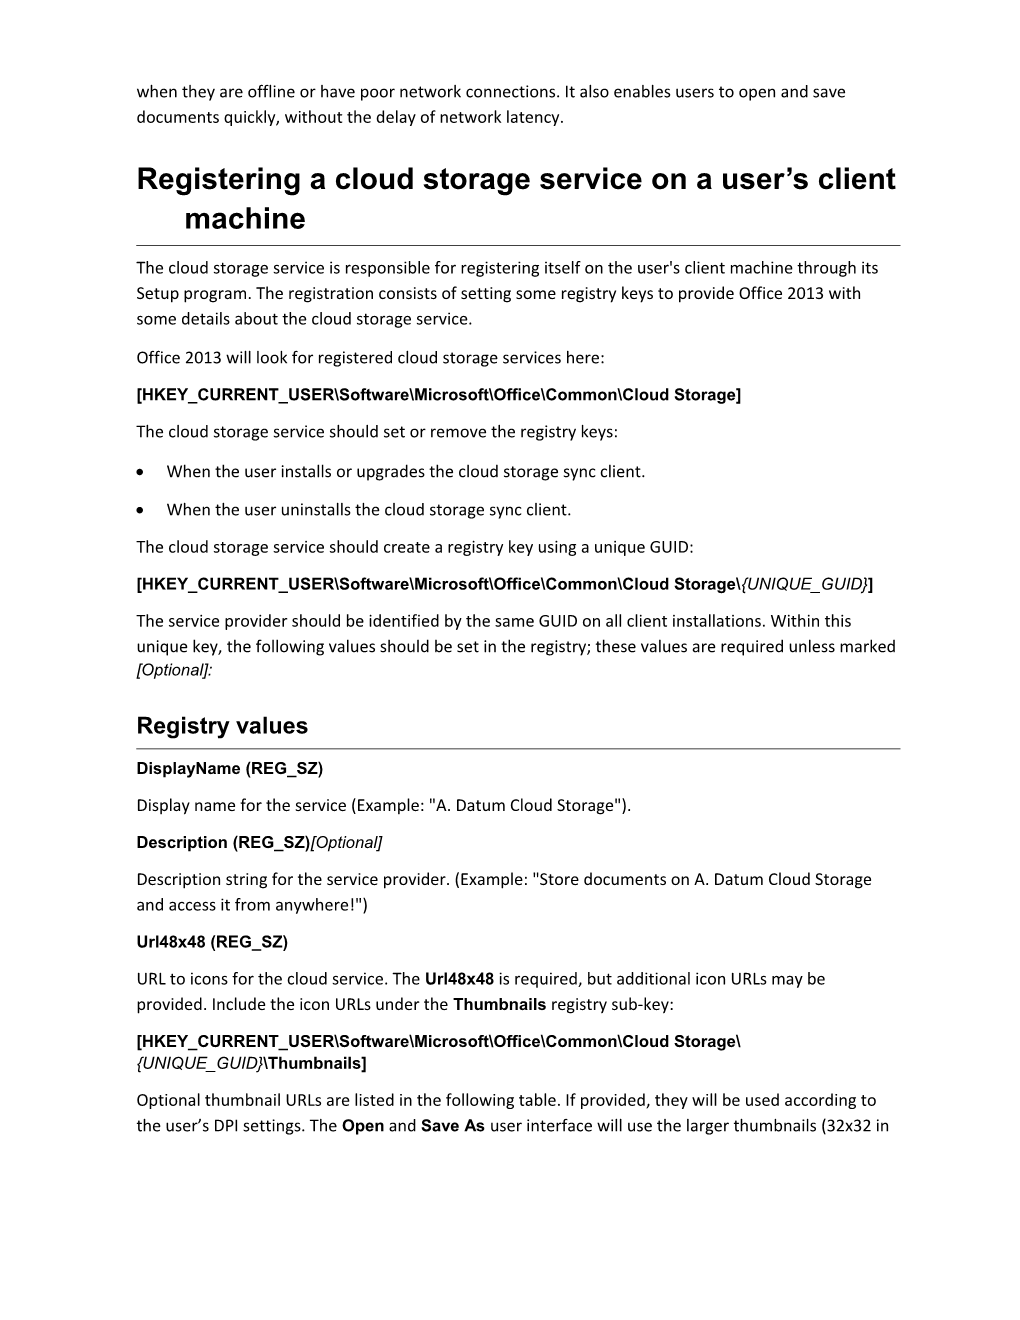 Integrating Additional Cloud Storage Services in Office 2013